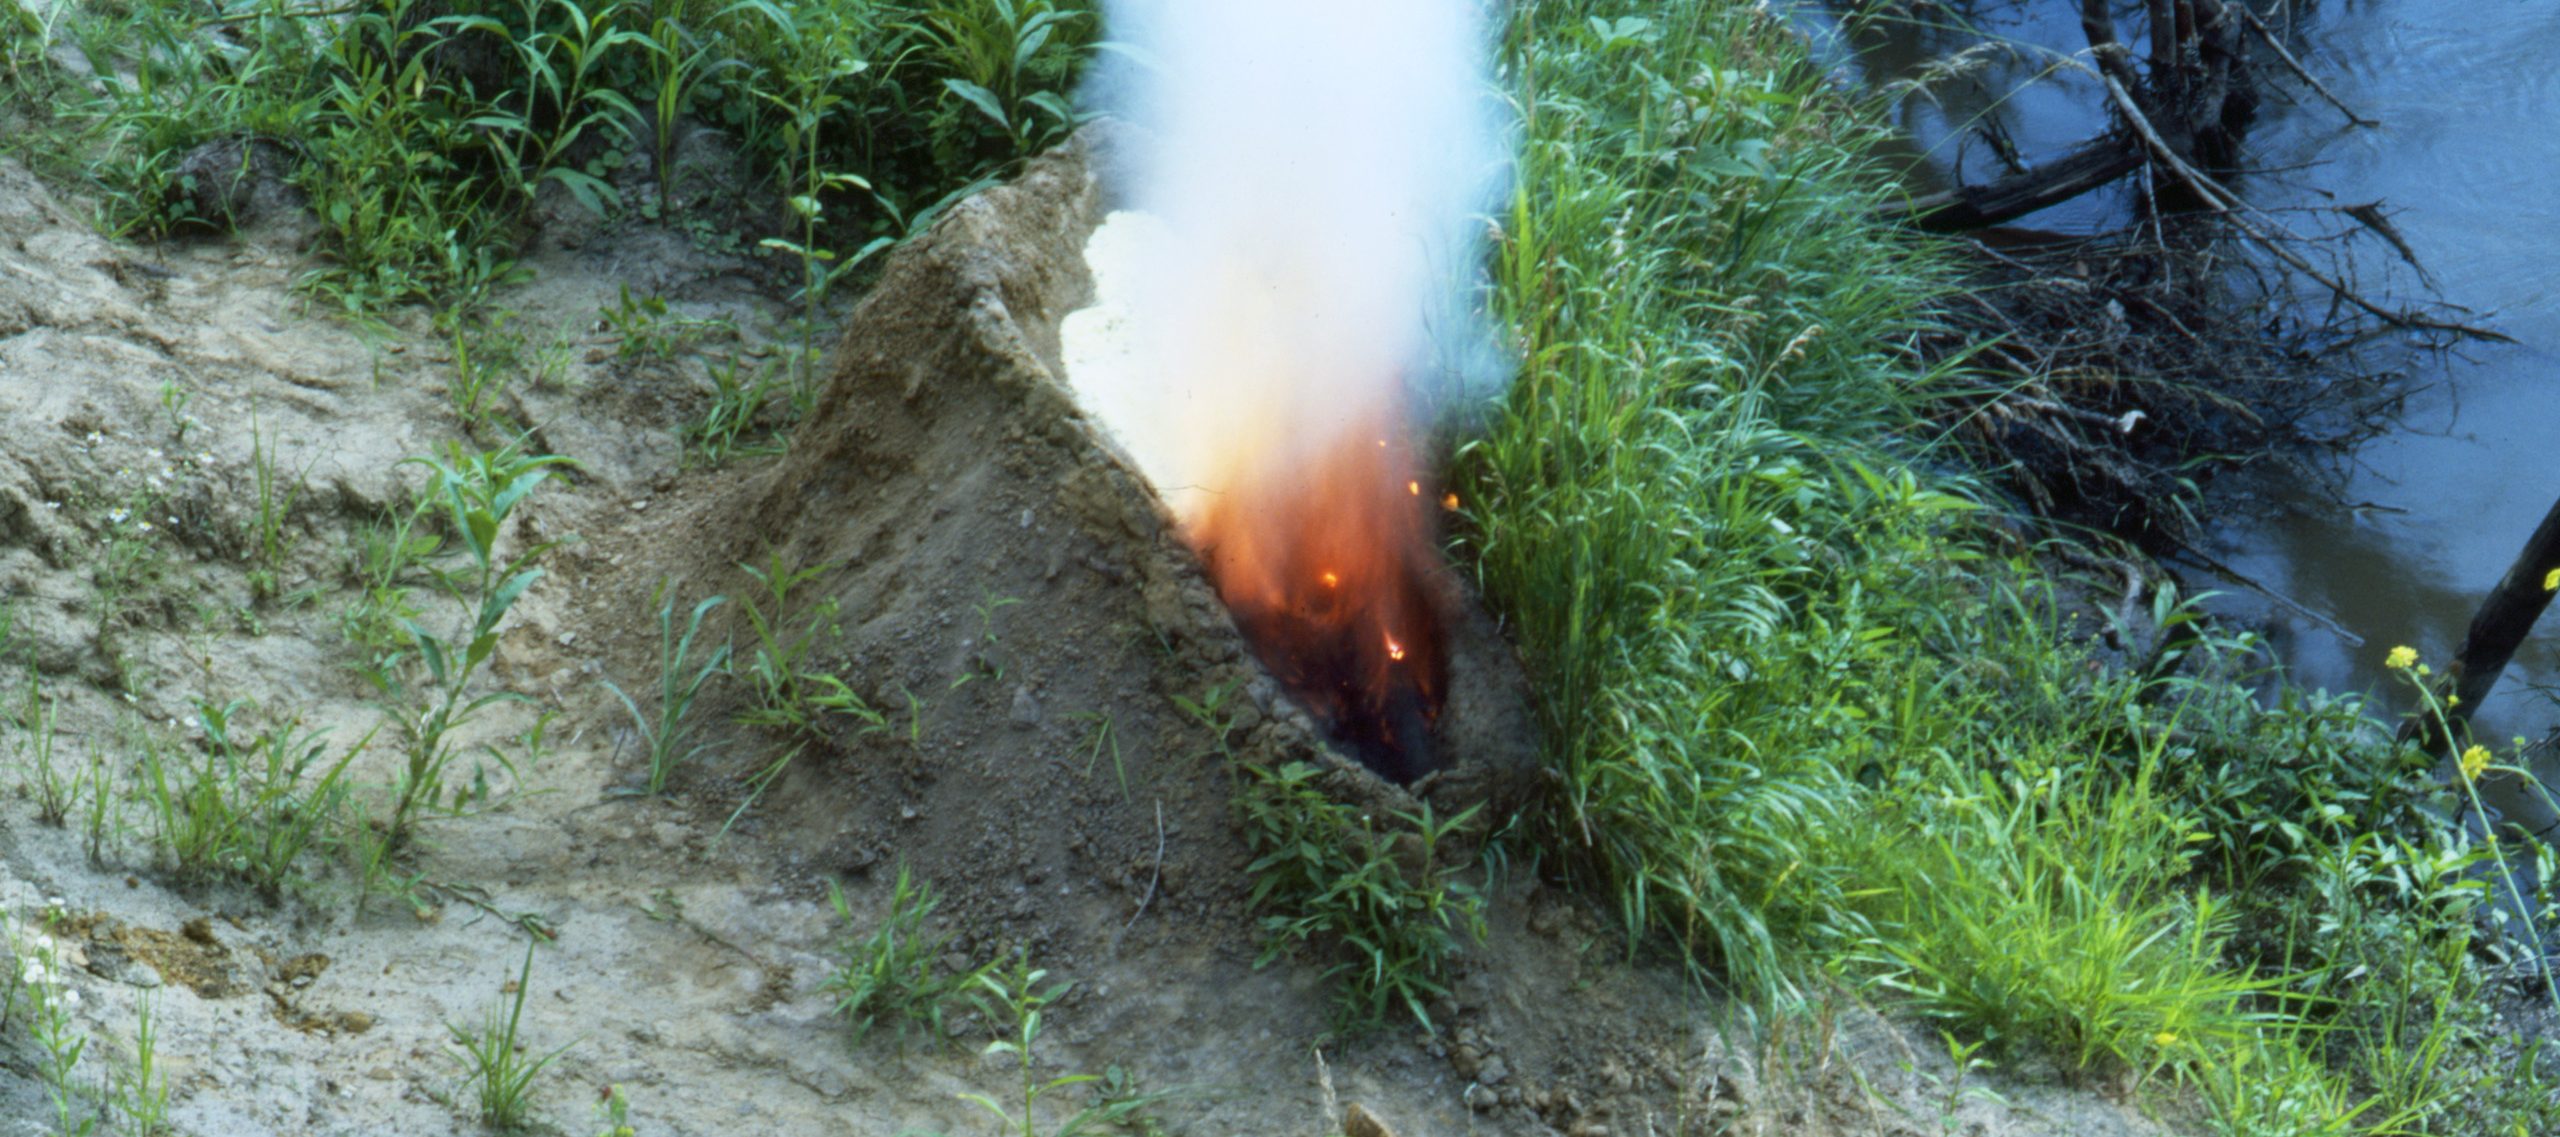 A mound of dirt in a grassy area by water. In the center of the mound is a human-shaped recess full of gunpowder that has been set aflame, exploding up in fire and white smoke, making the dirt mound resemble an erupting volcano.